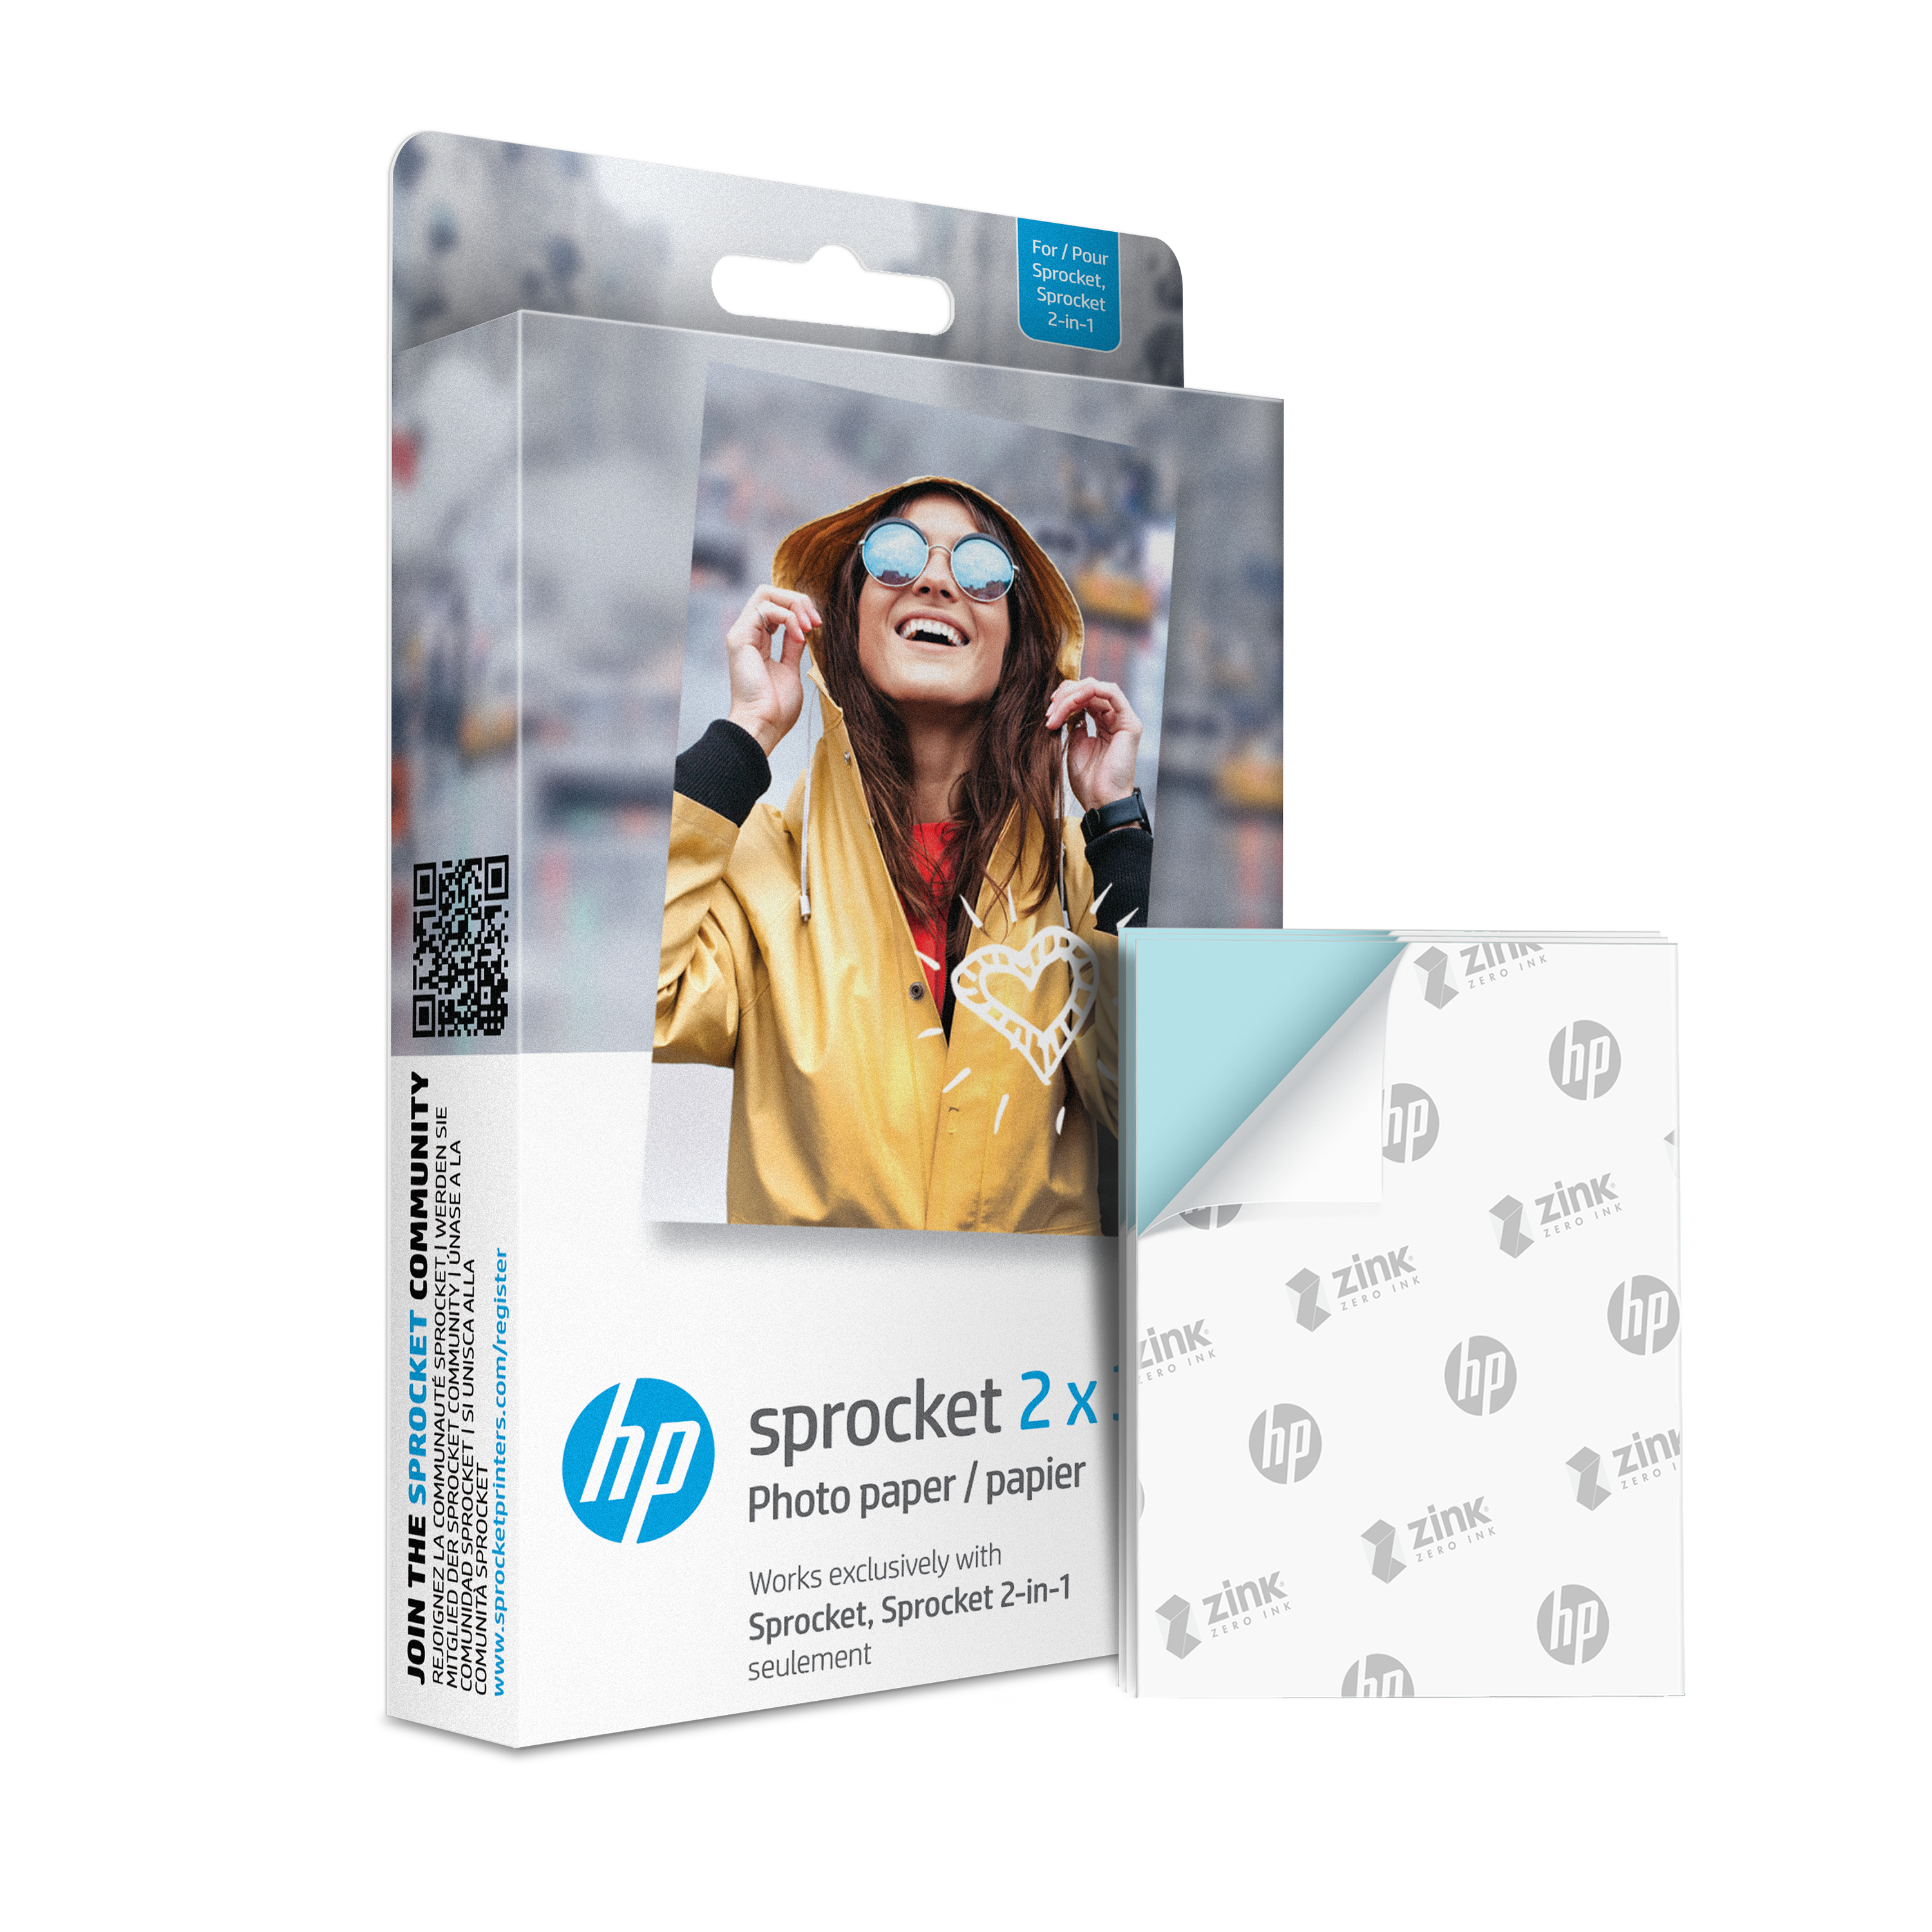 HP Sprocket Zink Photo Paper 2x3 for HP Sprocket Photo Printers, 100  Sheets 190781150534